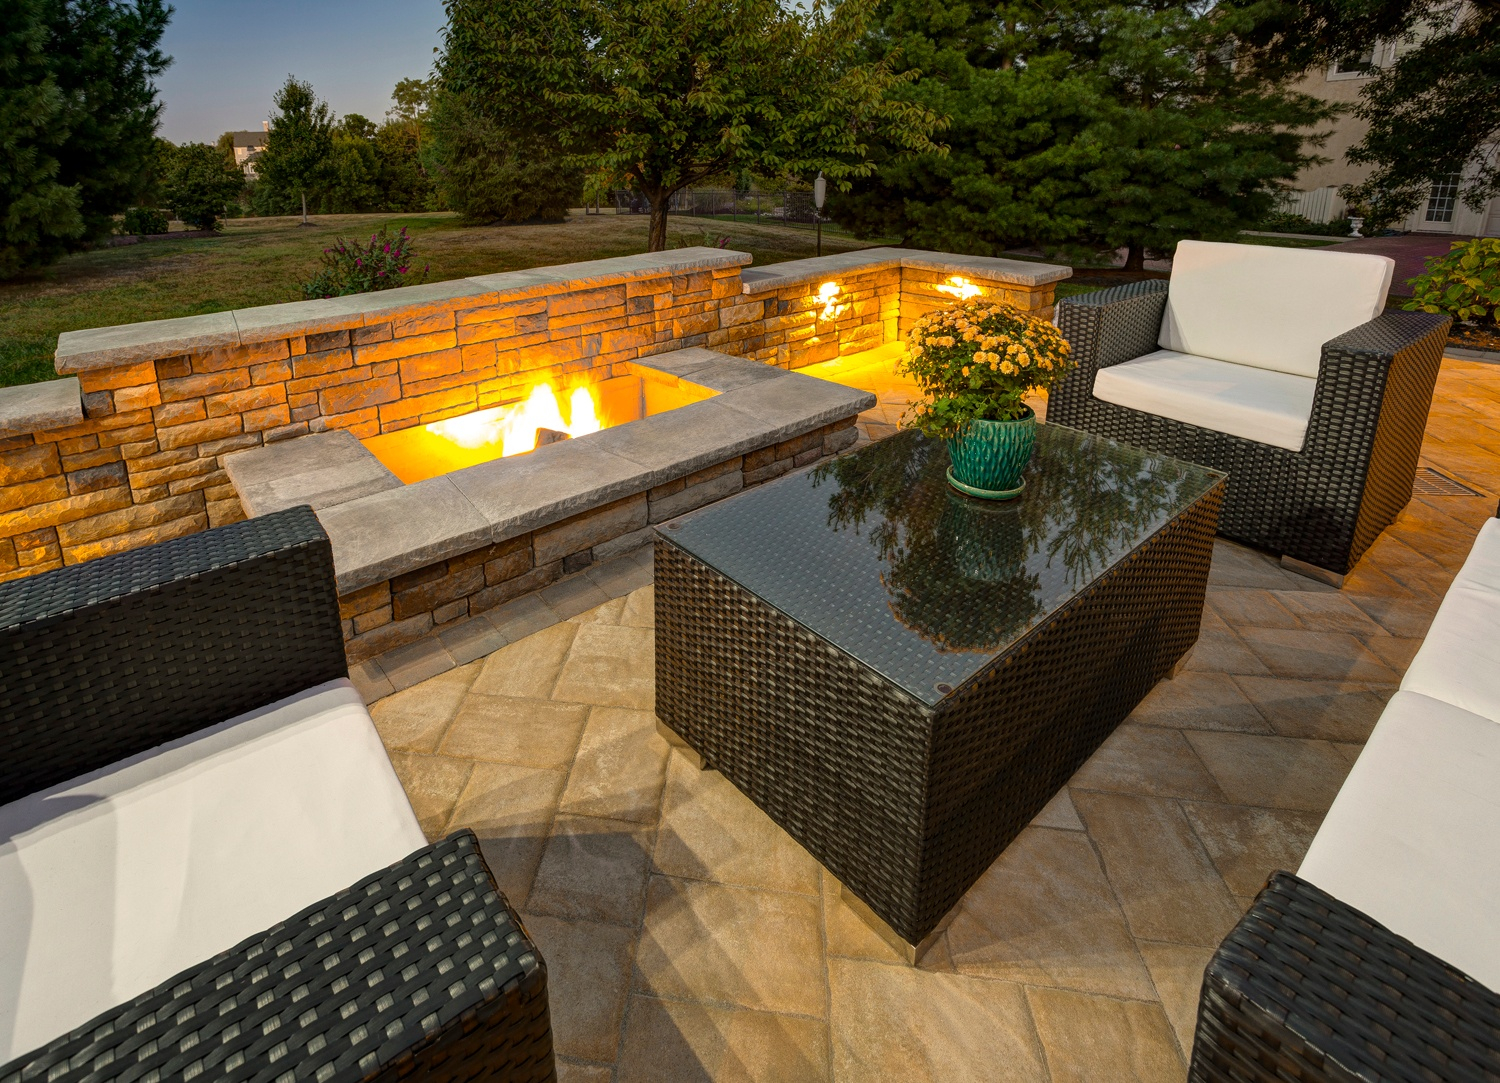 11 Of The Hottest Fire Pit And Outdoor Fireplace Ideas And Pictures in proportions 1500 X 1083